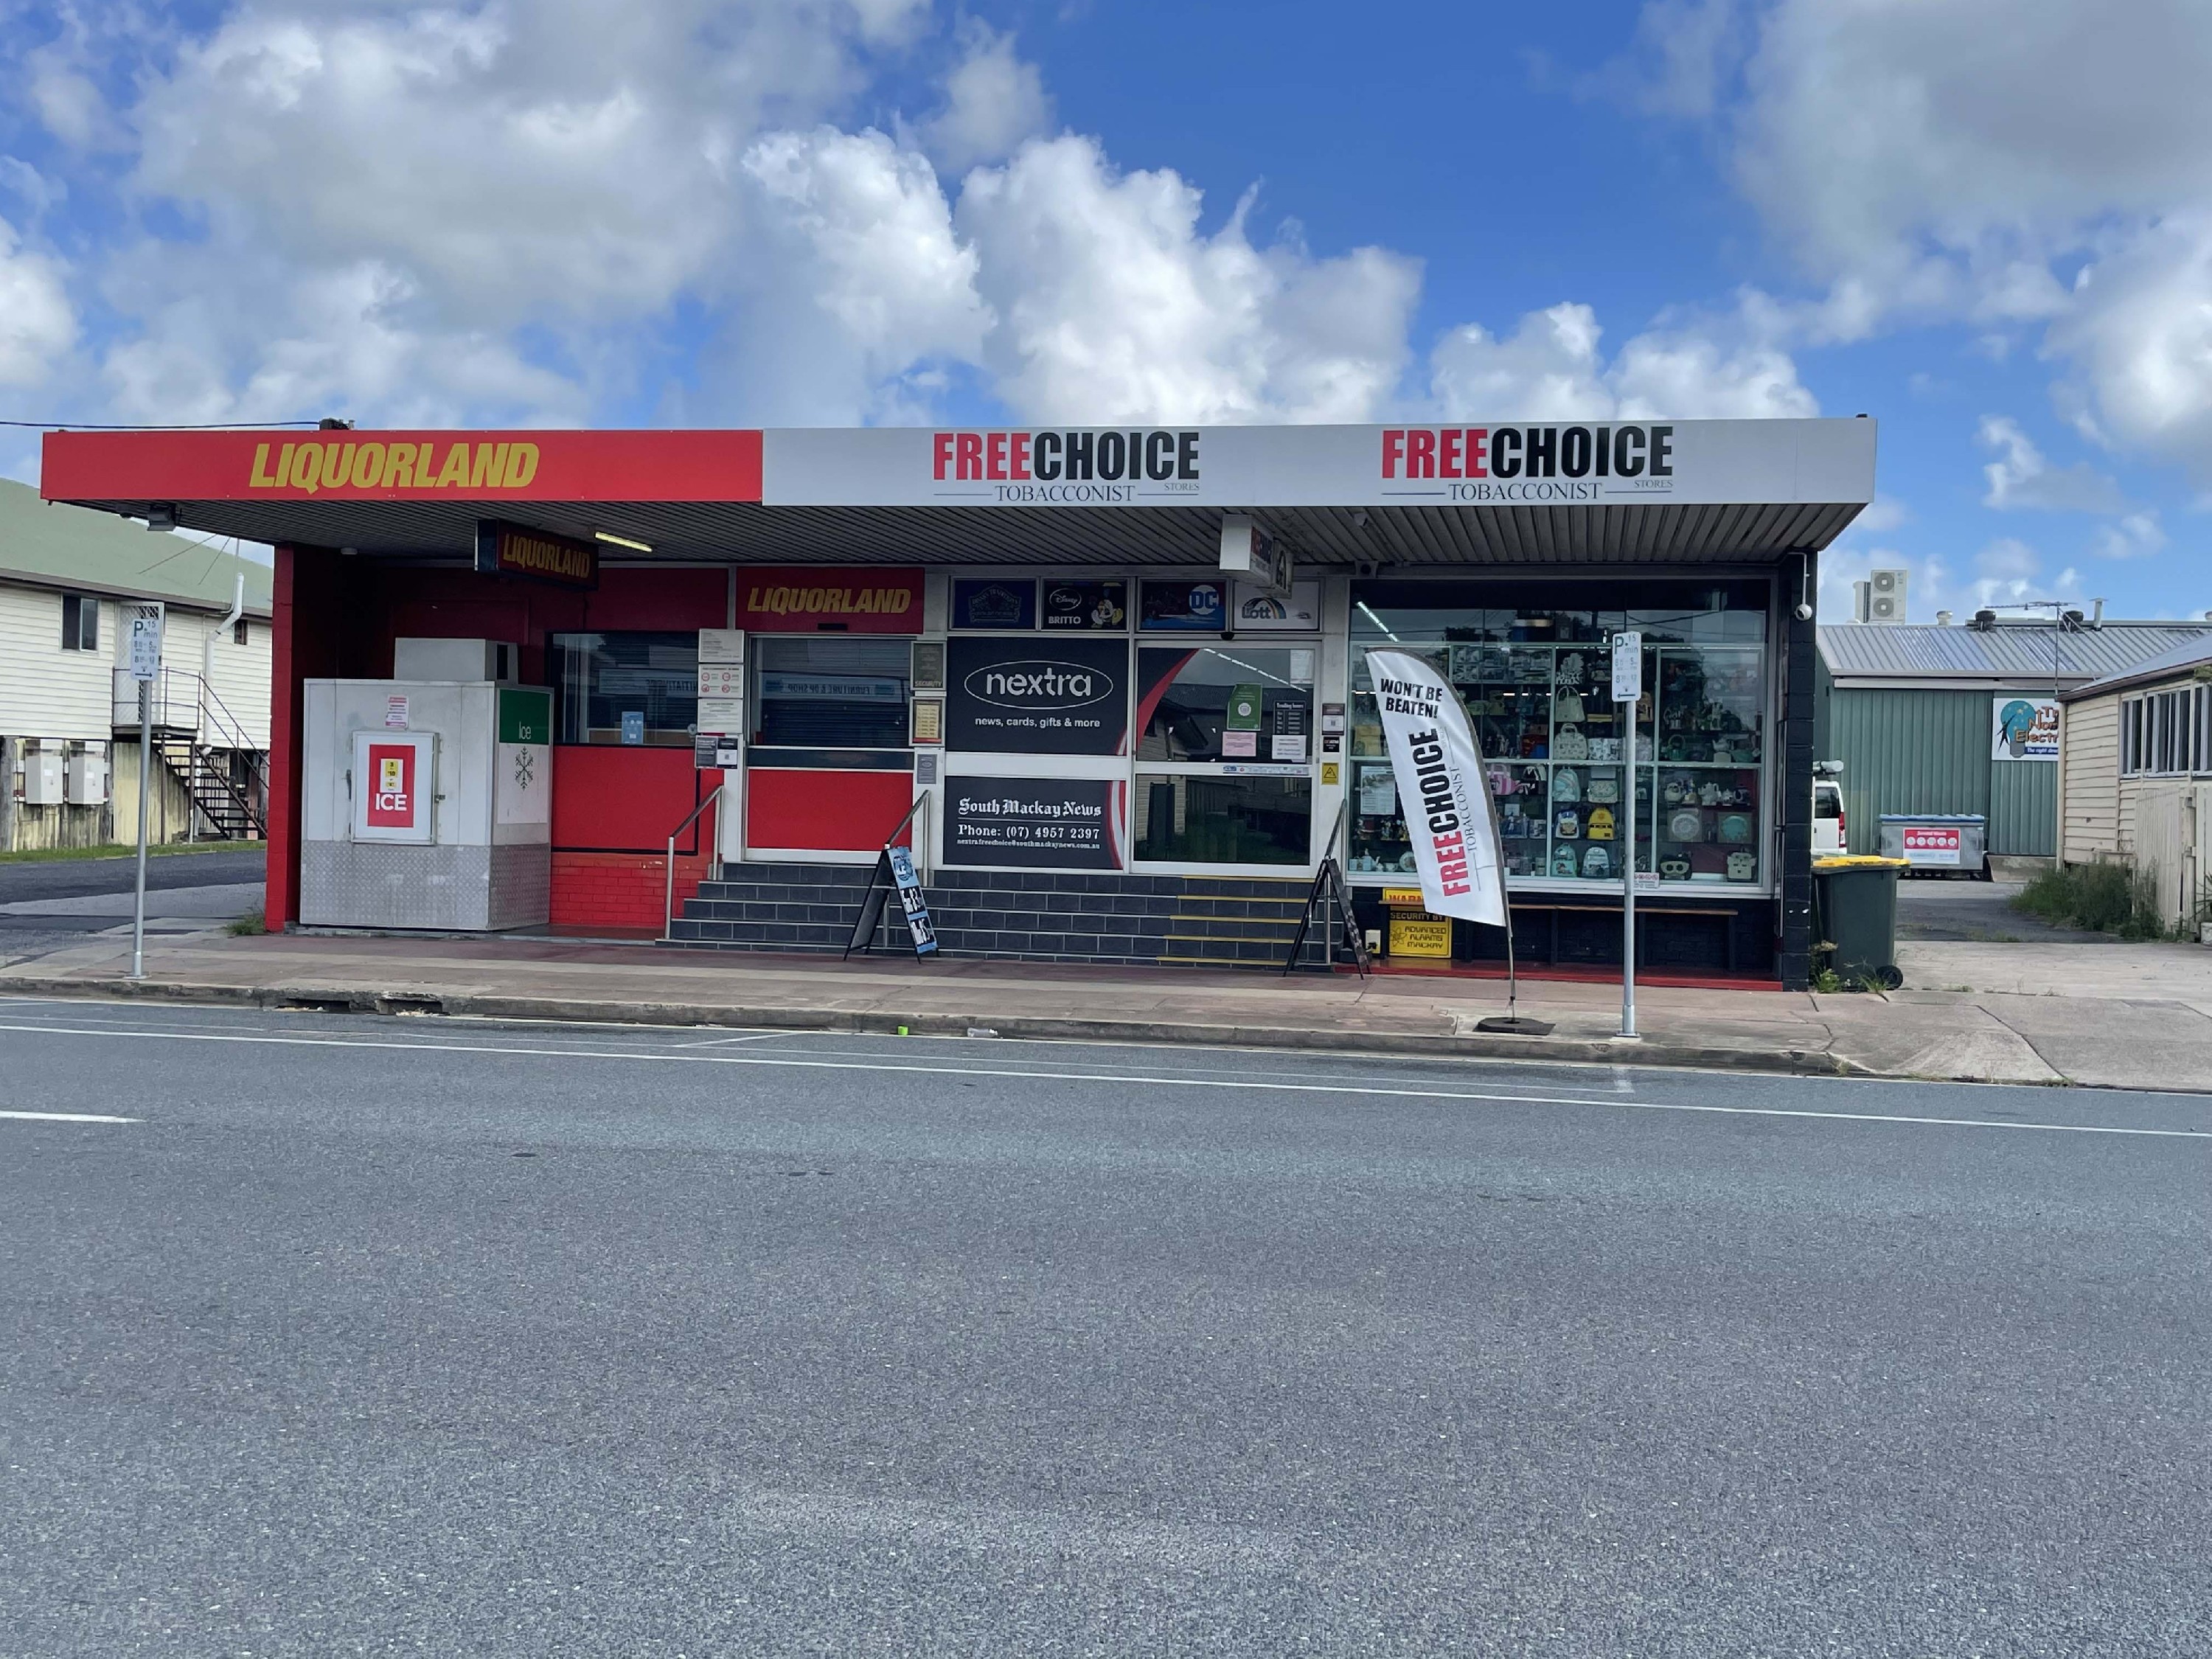 3 Businesses In One TOBACCONIST/NEWSAGENCY/ICE BUSINESS